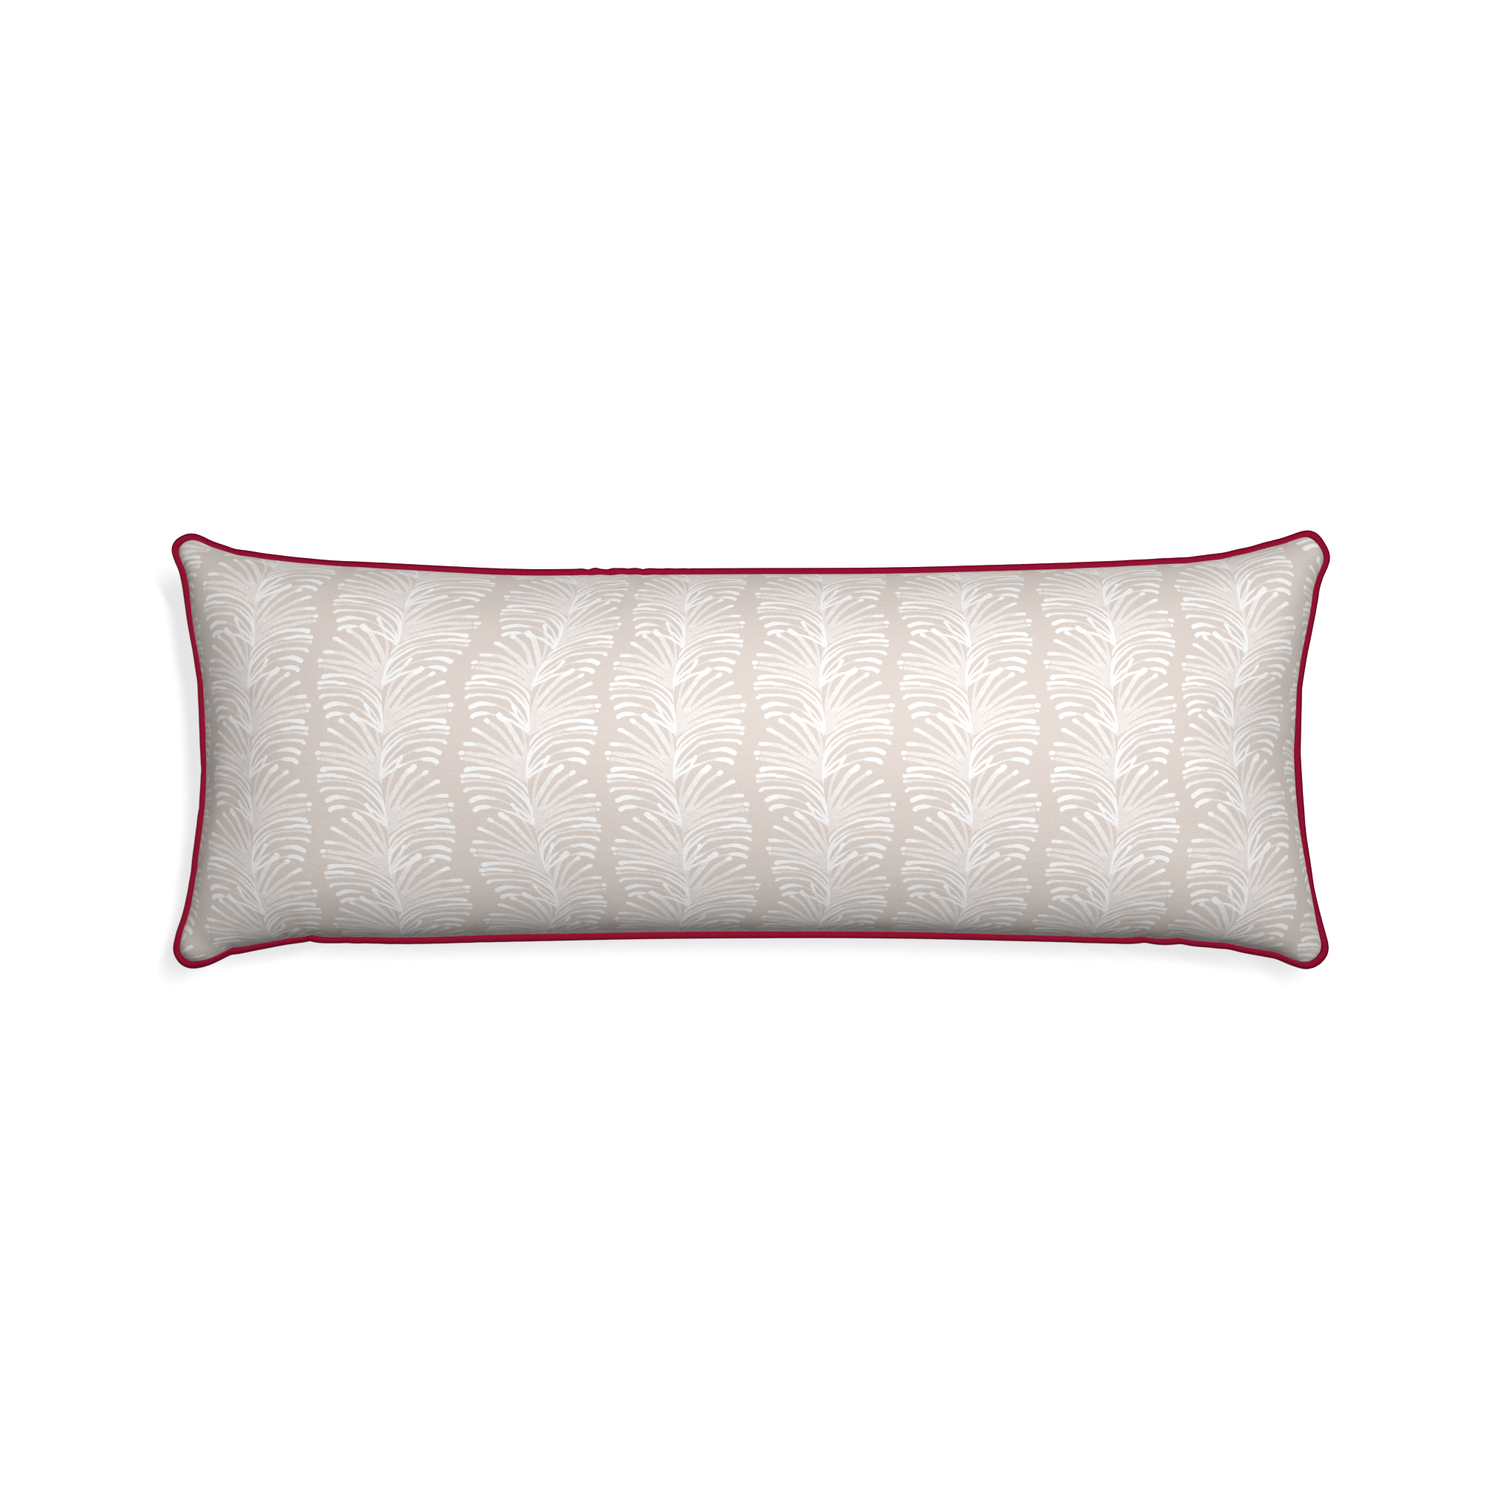 Xl-lumbar emma sand custom pillow with raspberry piping on white background